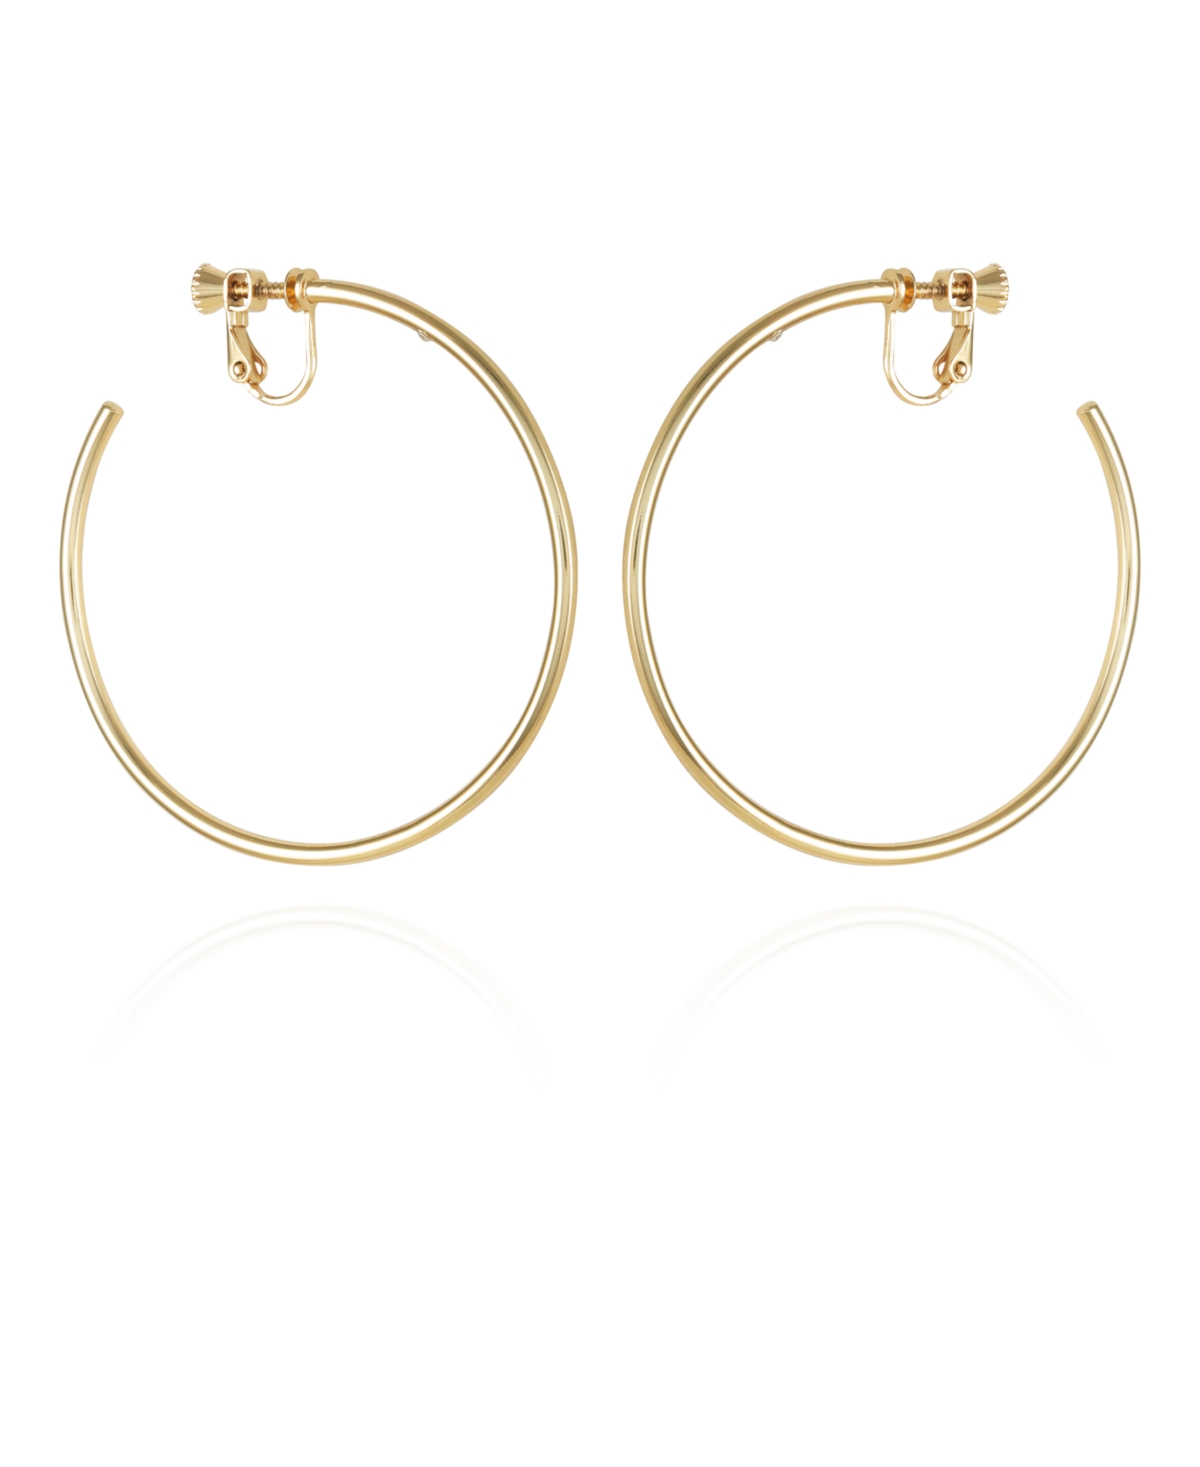 Vince Camuto Large Open Hoop Earrings In Gold-tone